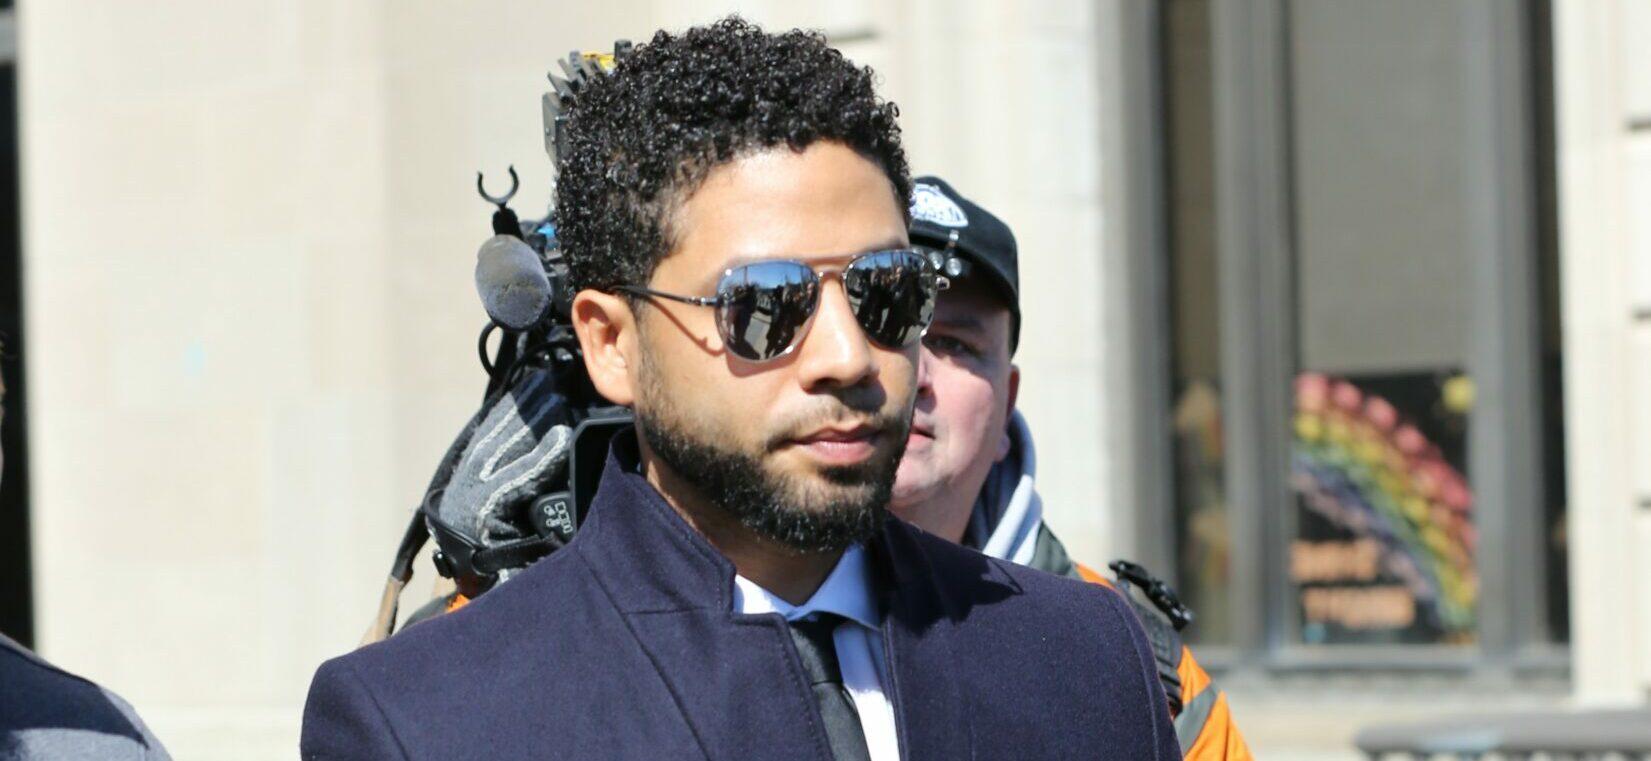 Jussie Smollett Bags First Post-Jail Project, Set To Make Directorial Debut